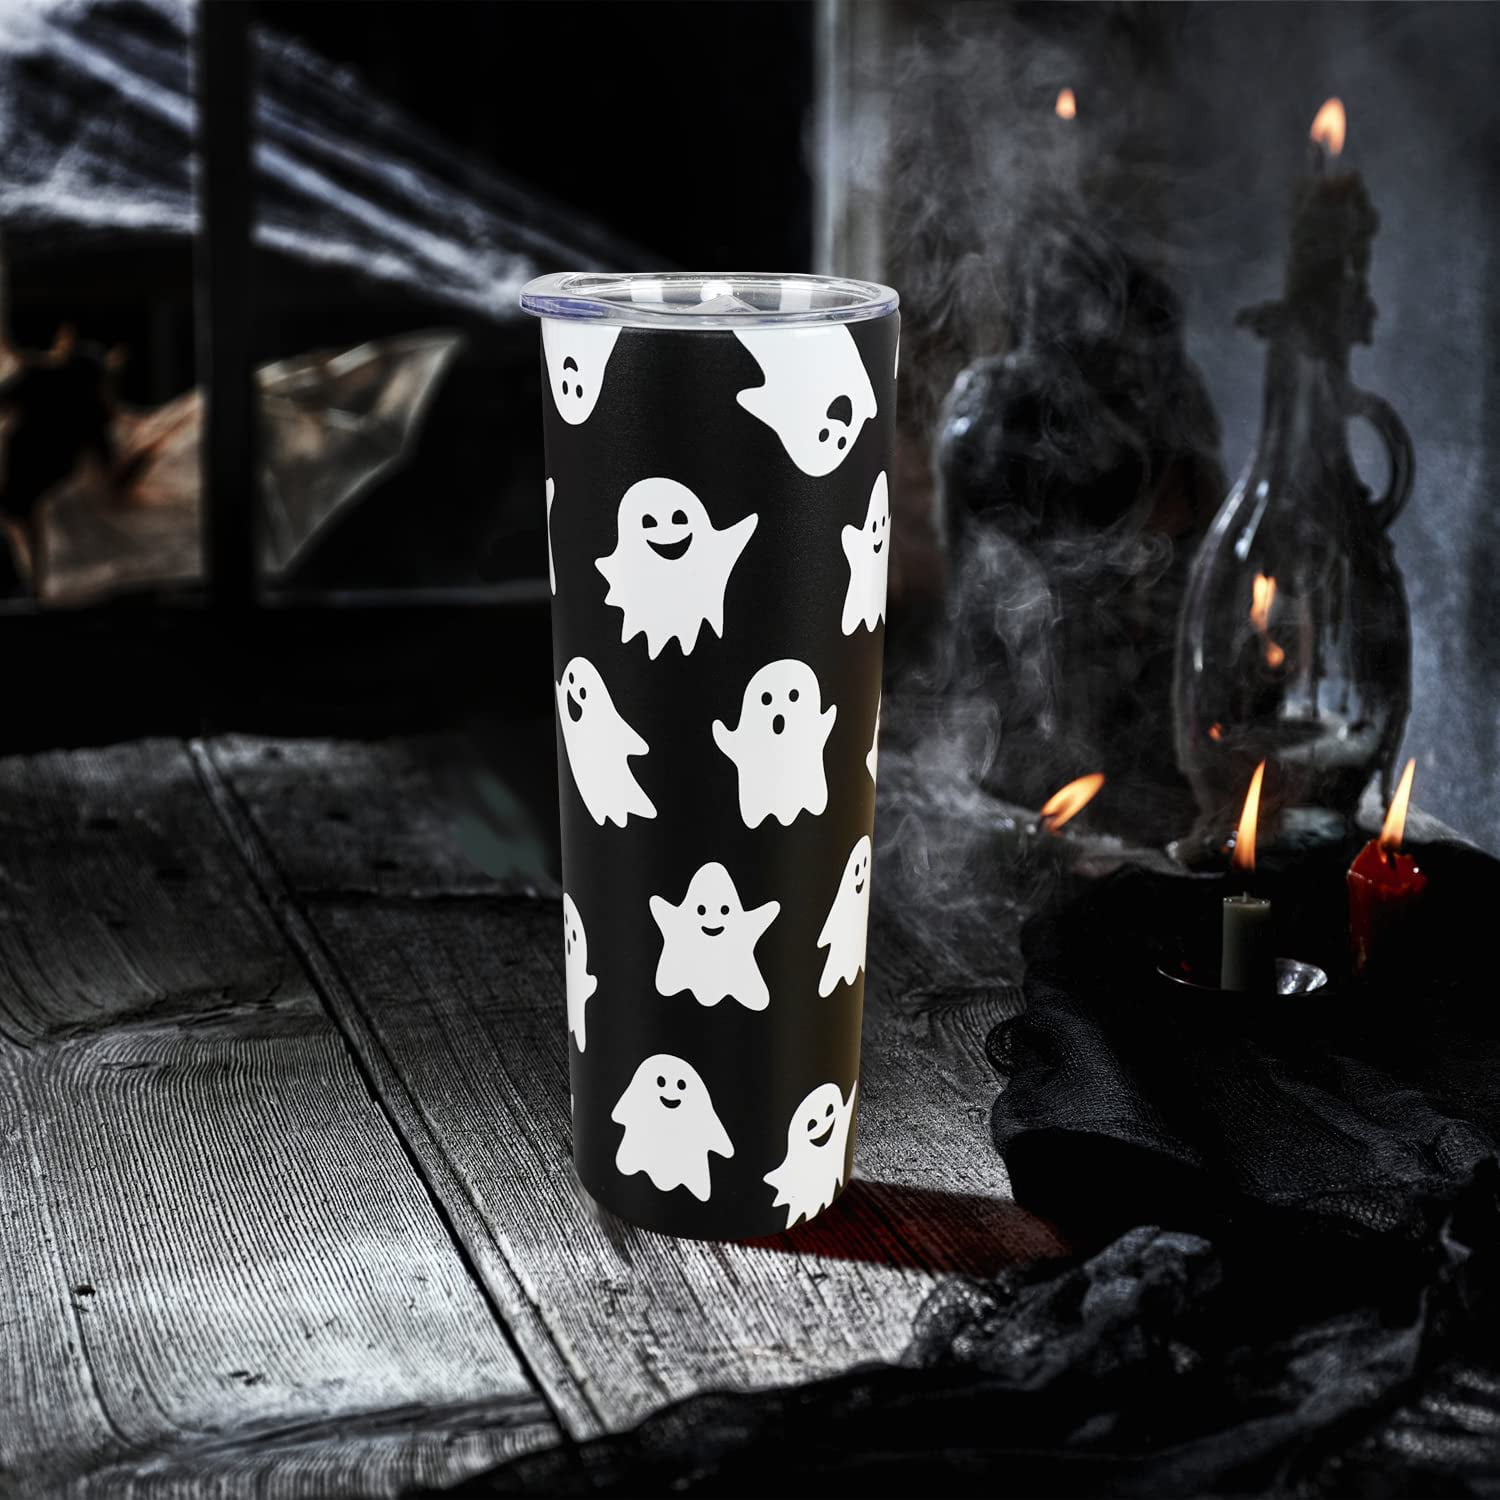 Shop Walmart's Viral $3 Ghost Cup For Halloween